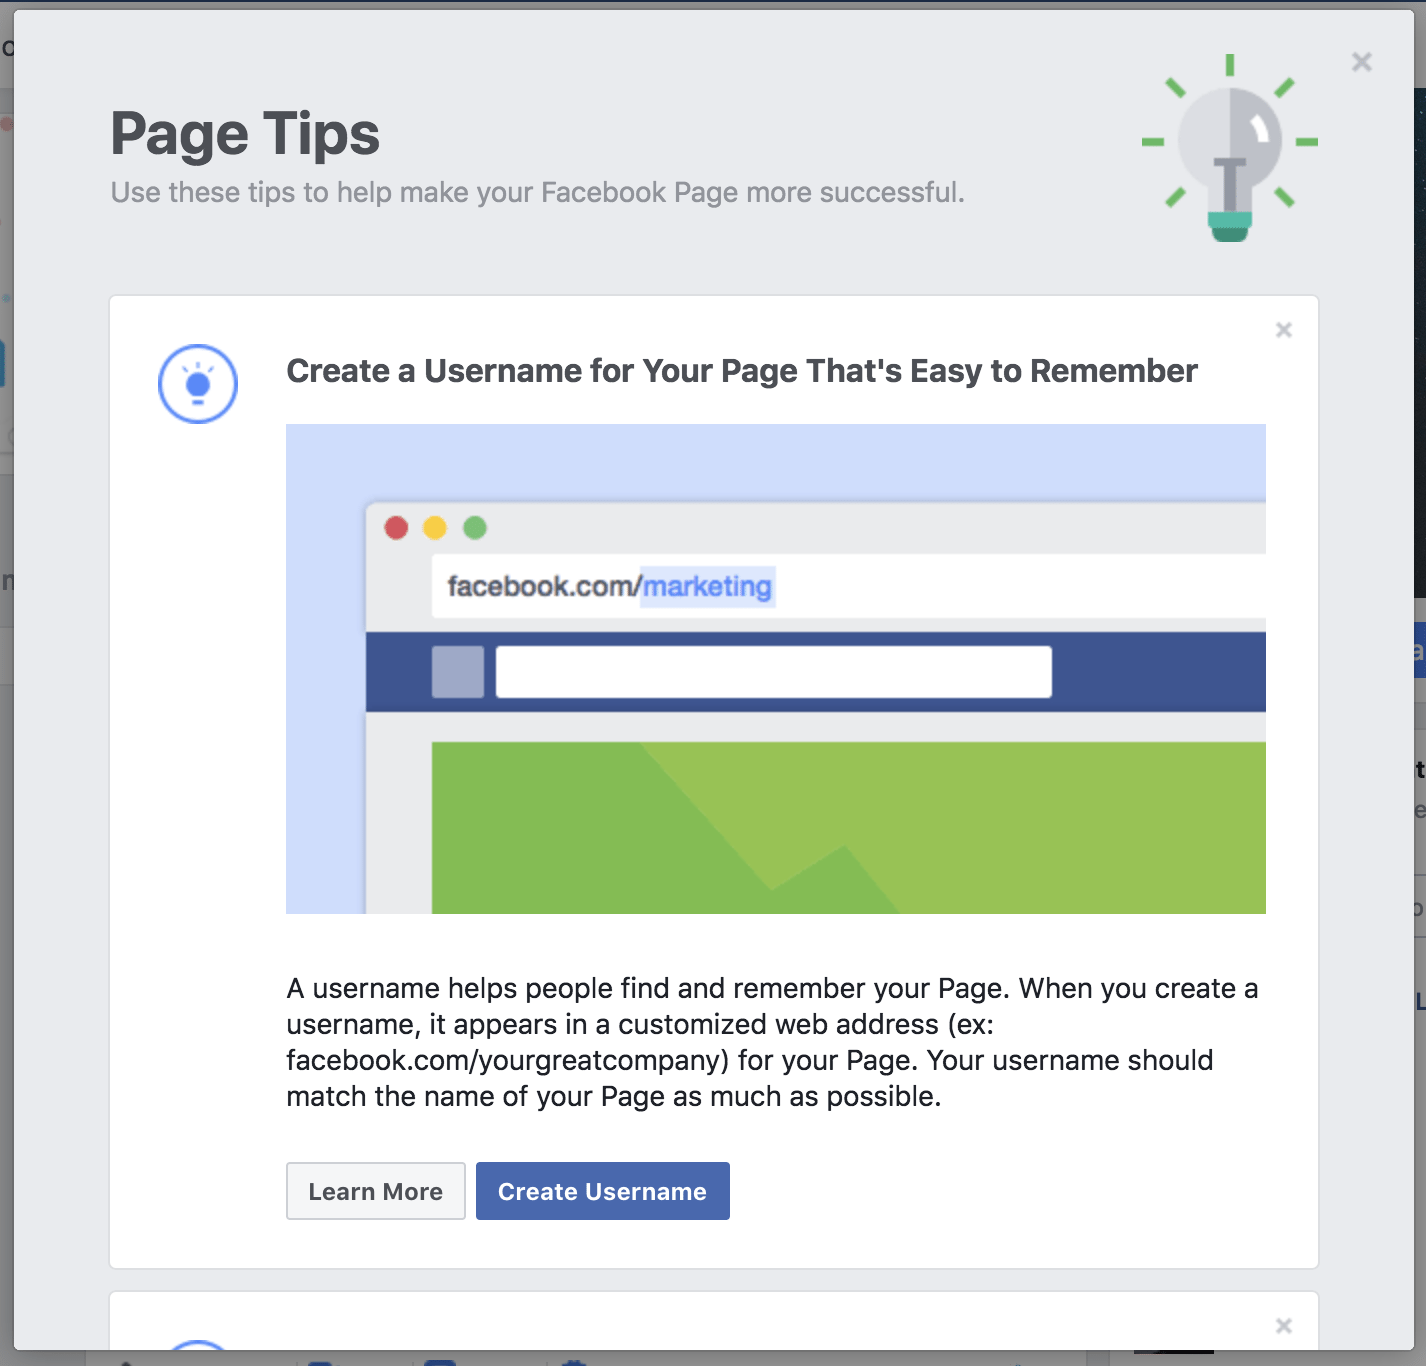 Facebook Page tips